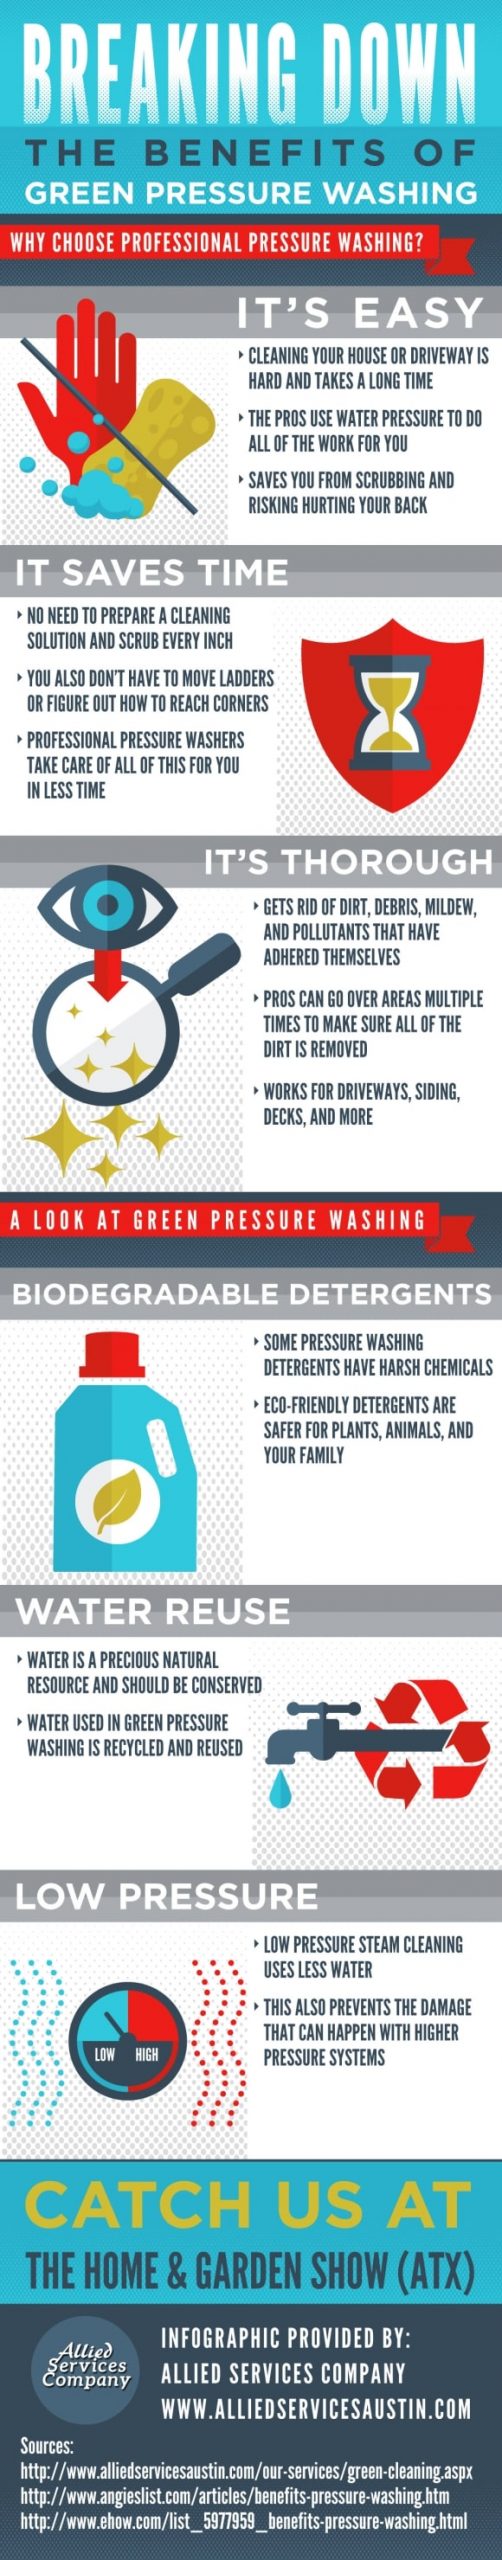 Benefits of Green Pressure Washing by Allied Services